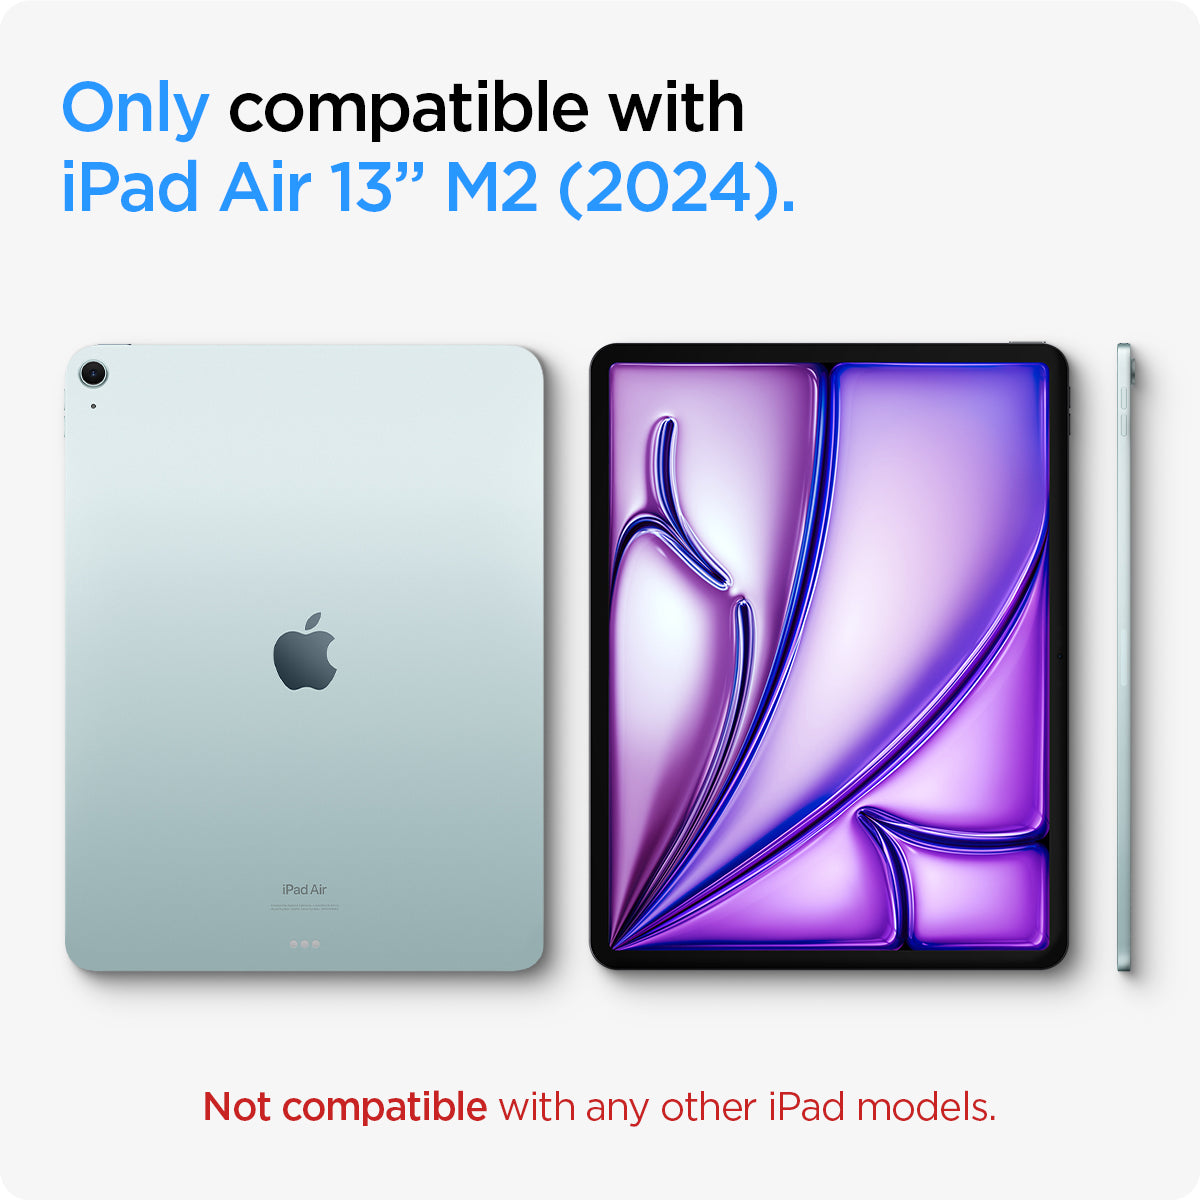 AGL07803 - Only compatible with iPad Air 13" M2 (2024). Not compatible with any other iPad models.